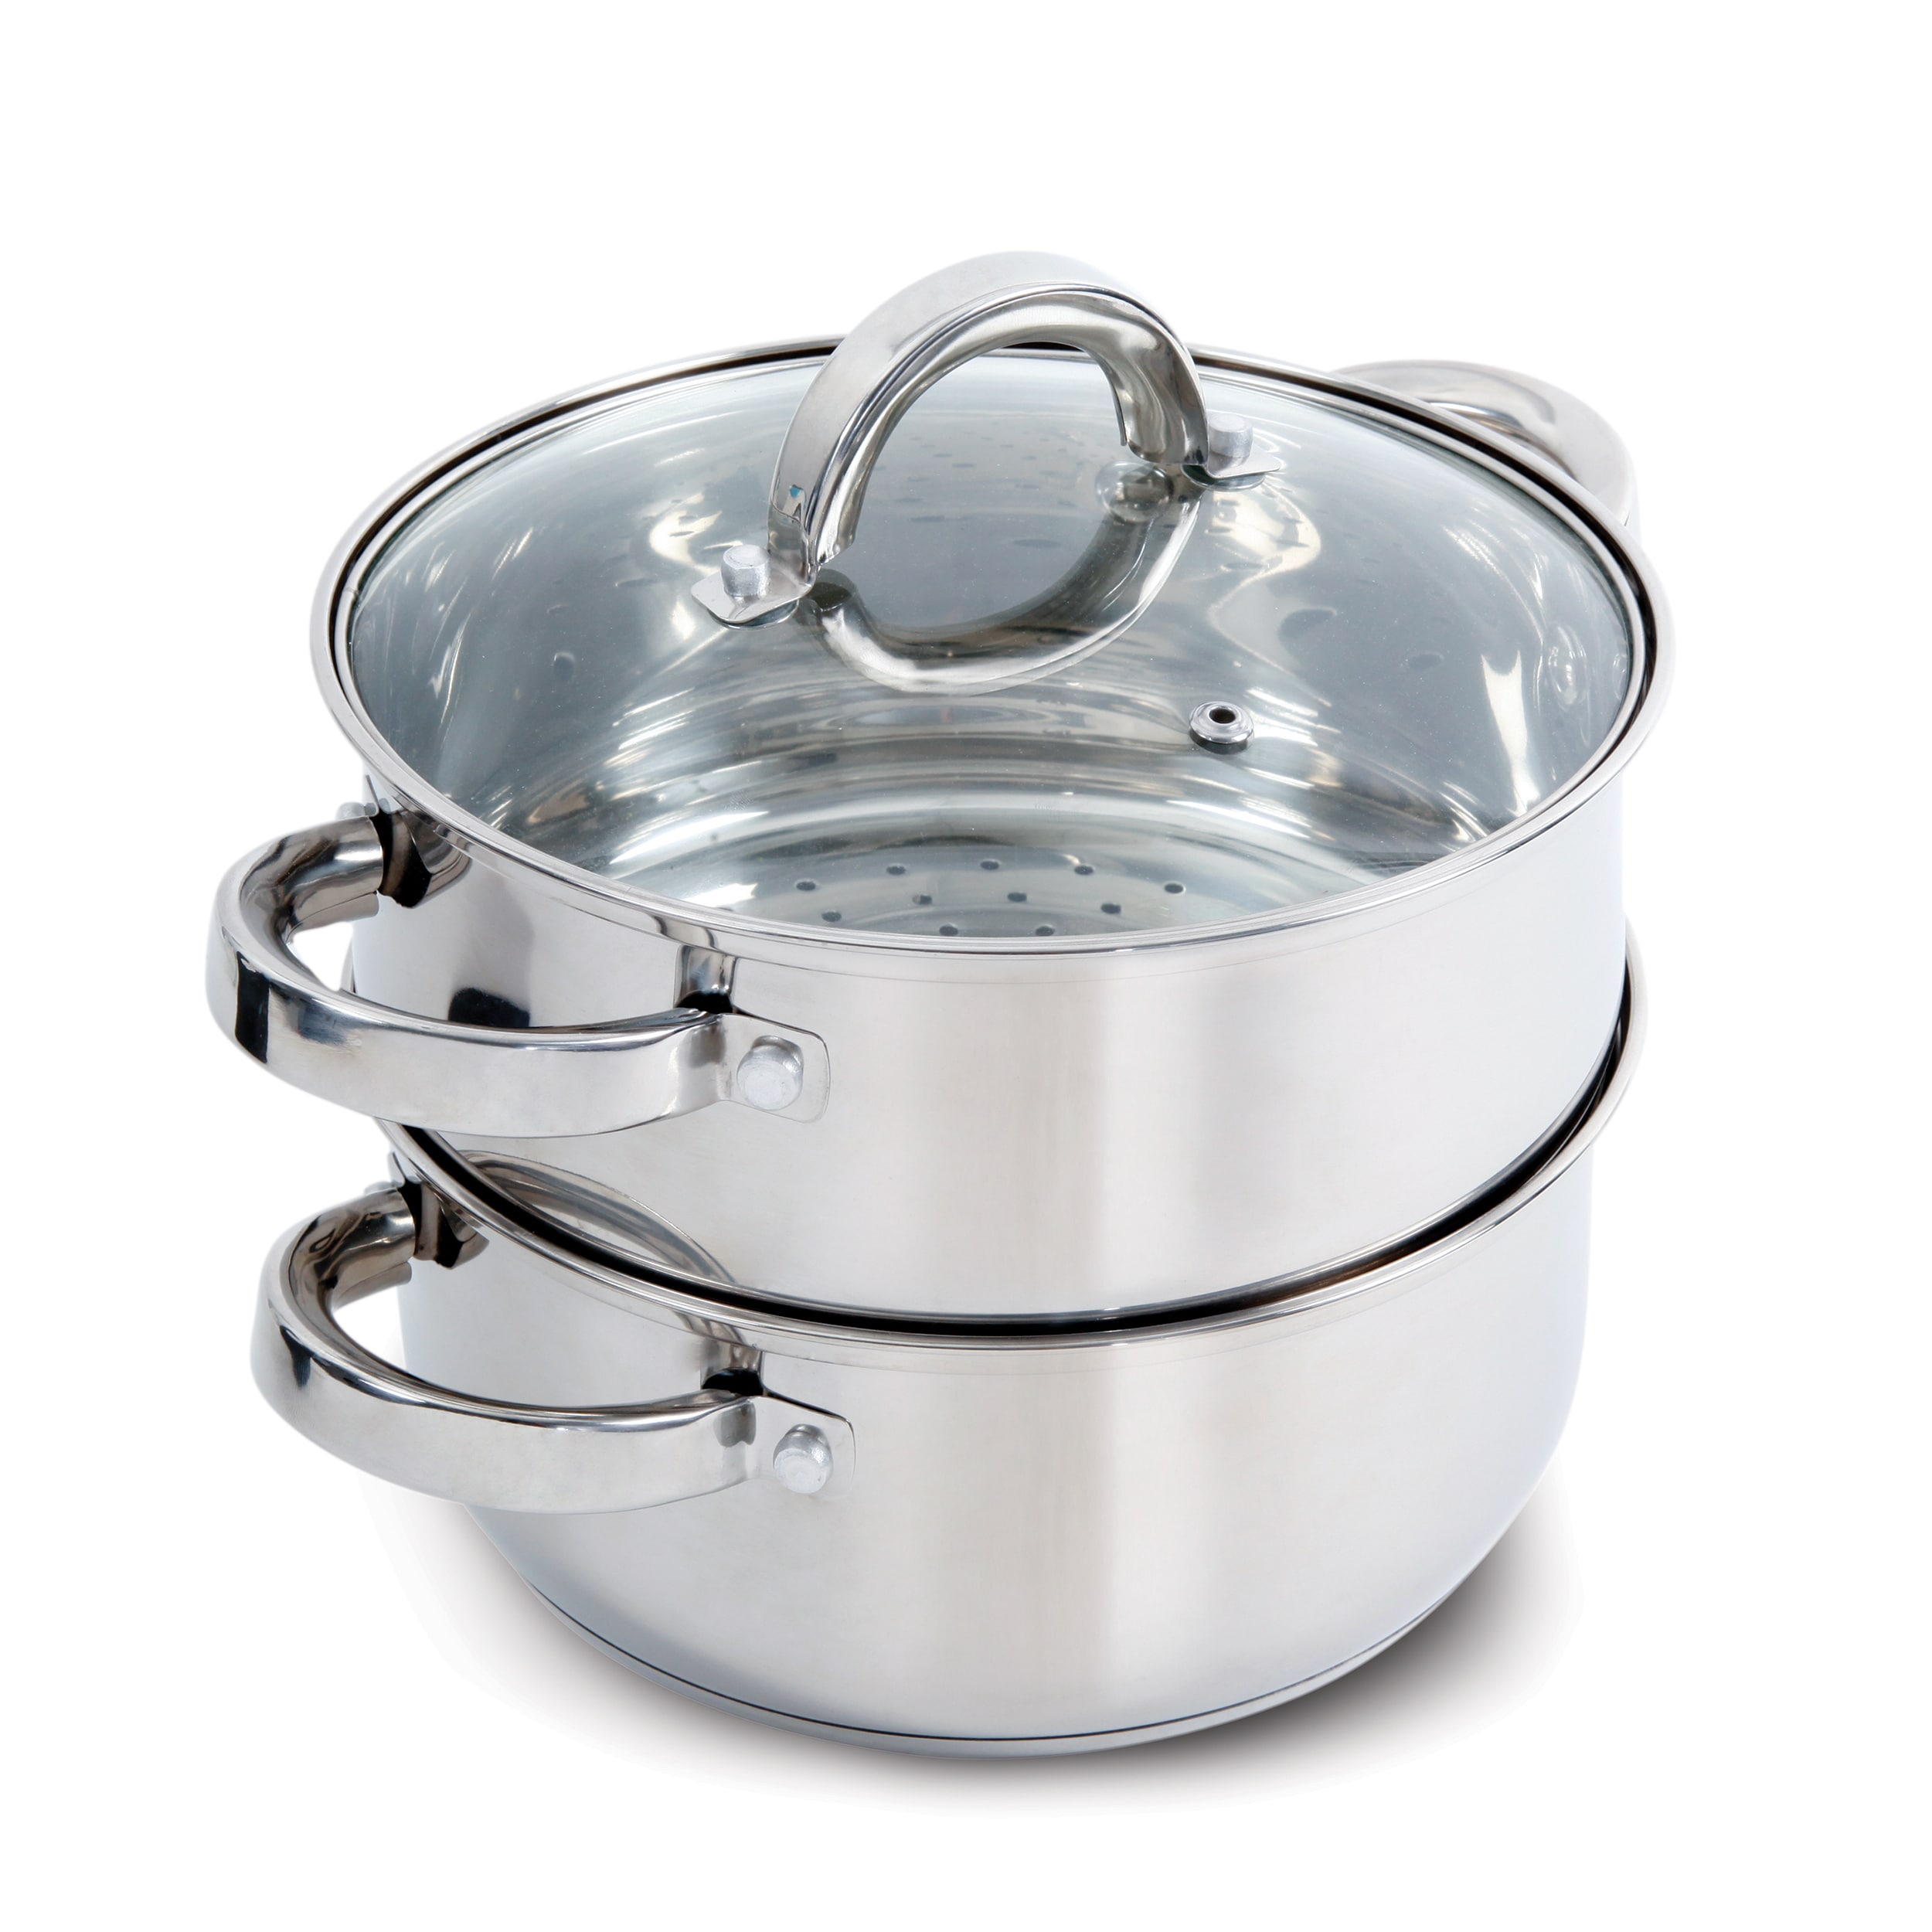 China 3Qt PFOA-Free Covered Saucepan with Steamer Insert Manufacturer and  Exporter